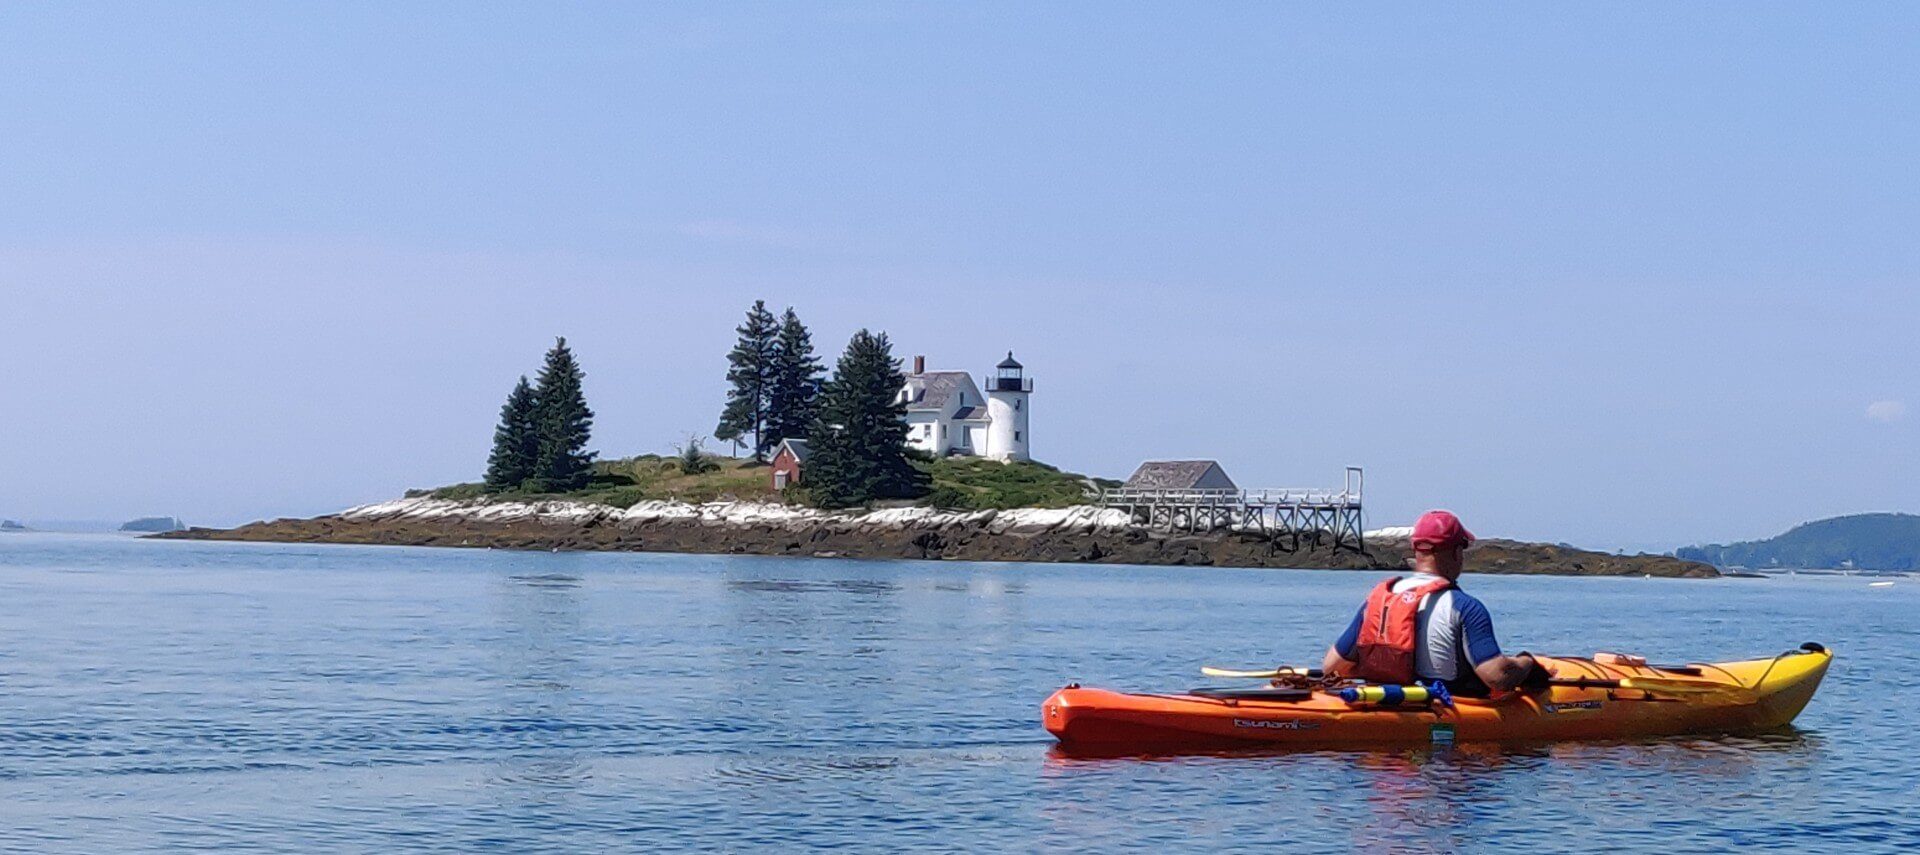 A water view with a man in an orange kayak, and an island beyond that has trees, a house, and a lighthouse